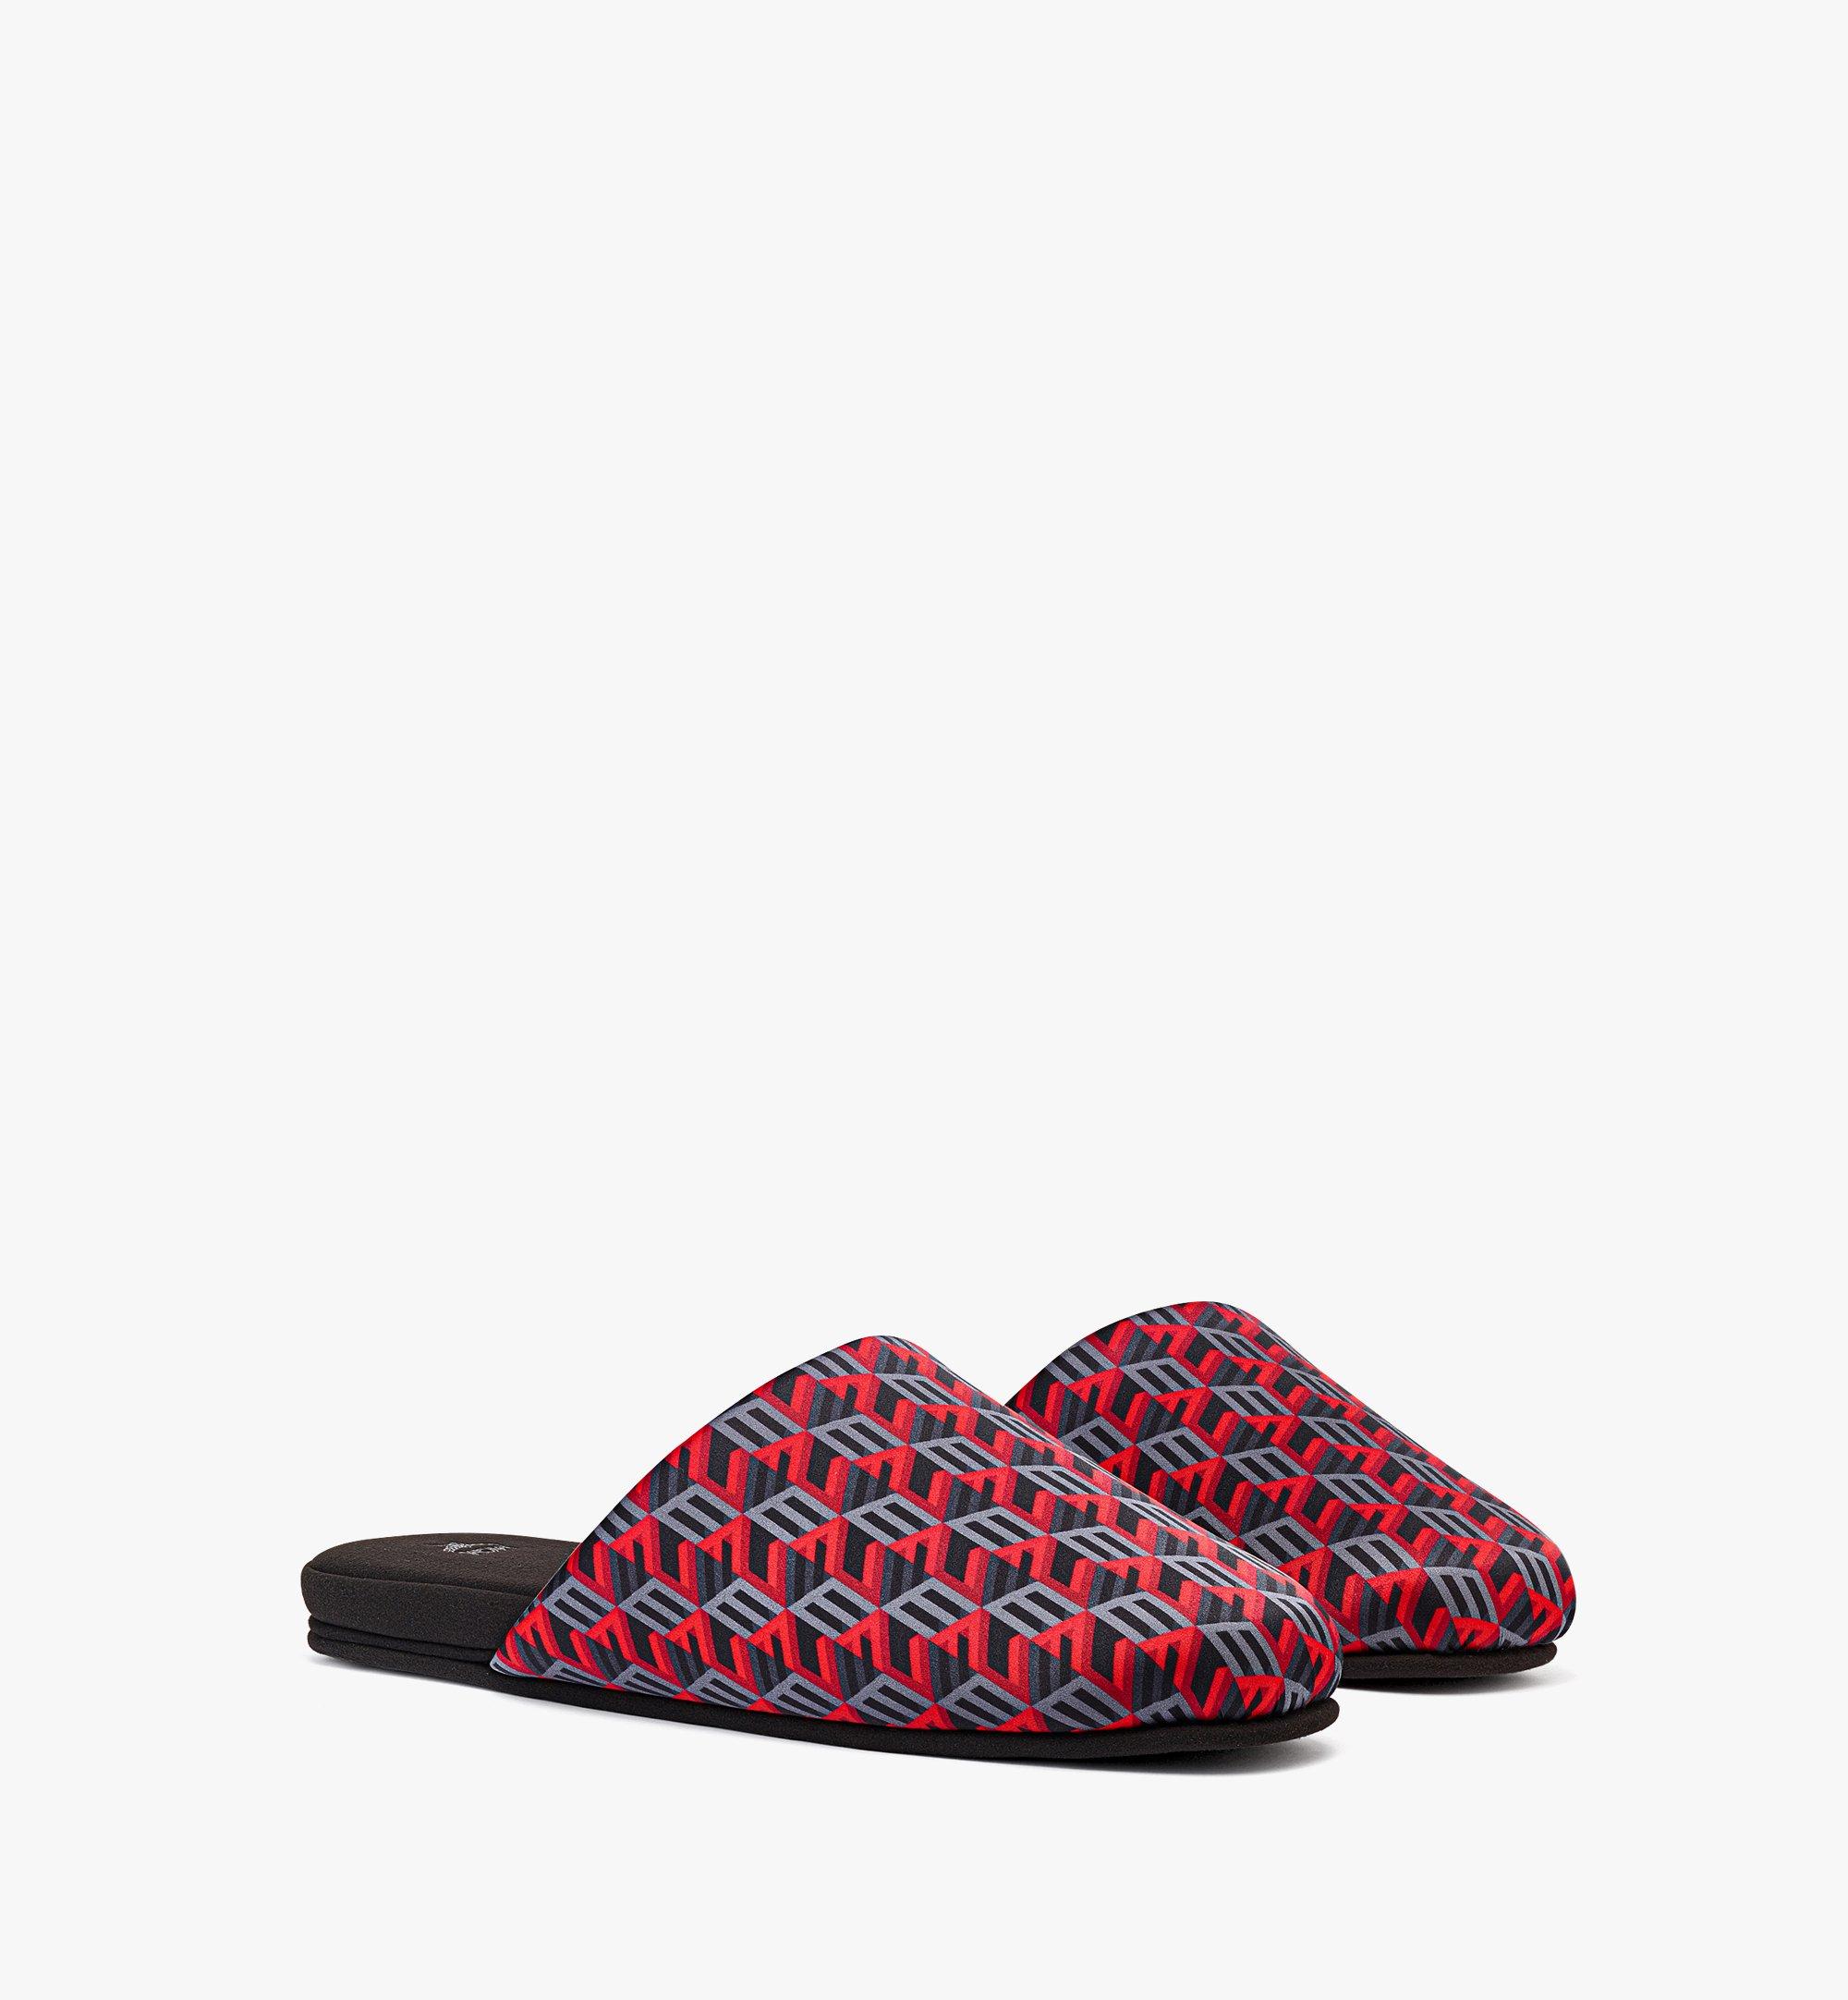 MCM House Slippers in Holiday Cubic Monogram Jacquard Red MEXCSCK11R000M Alternate View 1